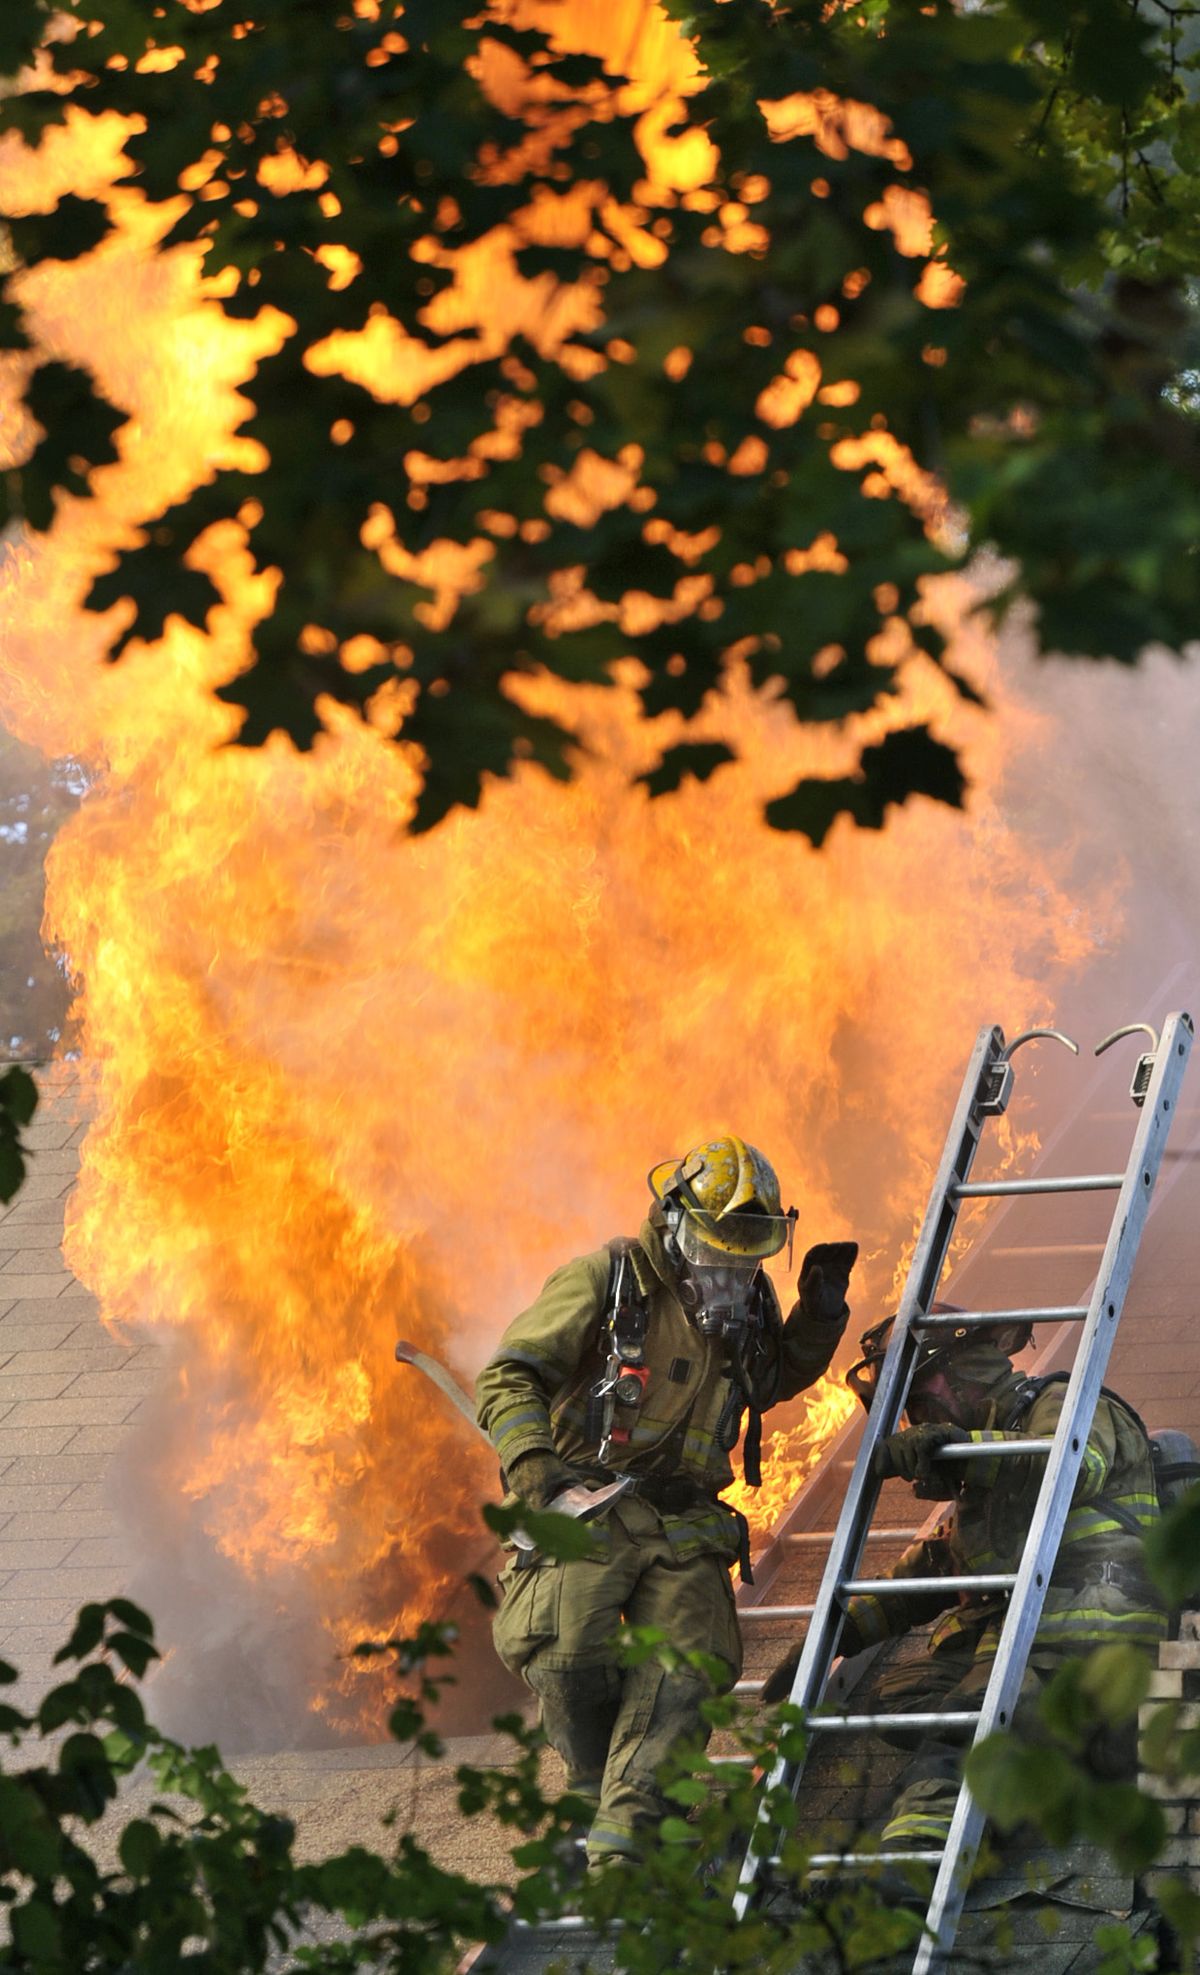 After venting a garage roof, Spokane Fire Department firefighters scramble for safety as flames explode near Pacific Avenue and Hemlock Street Tuesday.  (Dan Pelle / The Spokesman-Review)